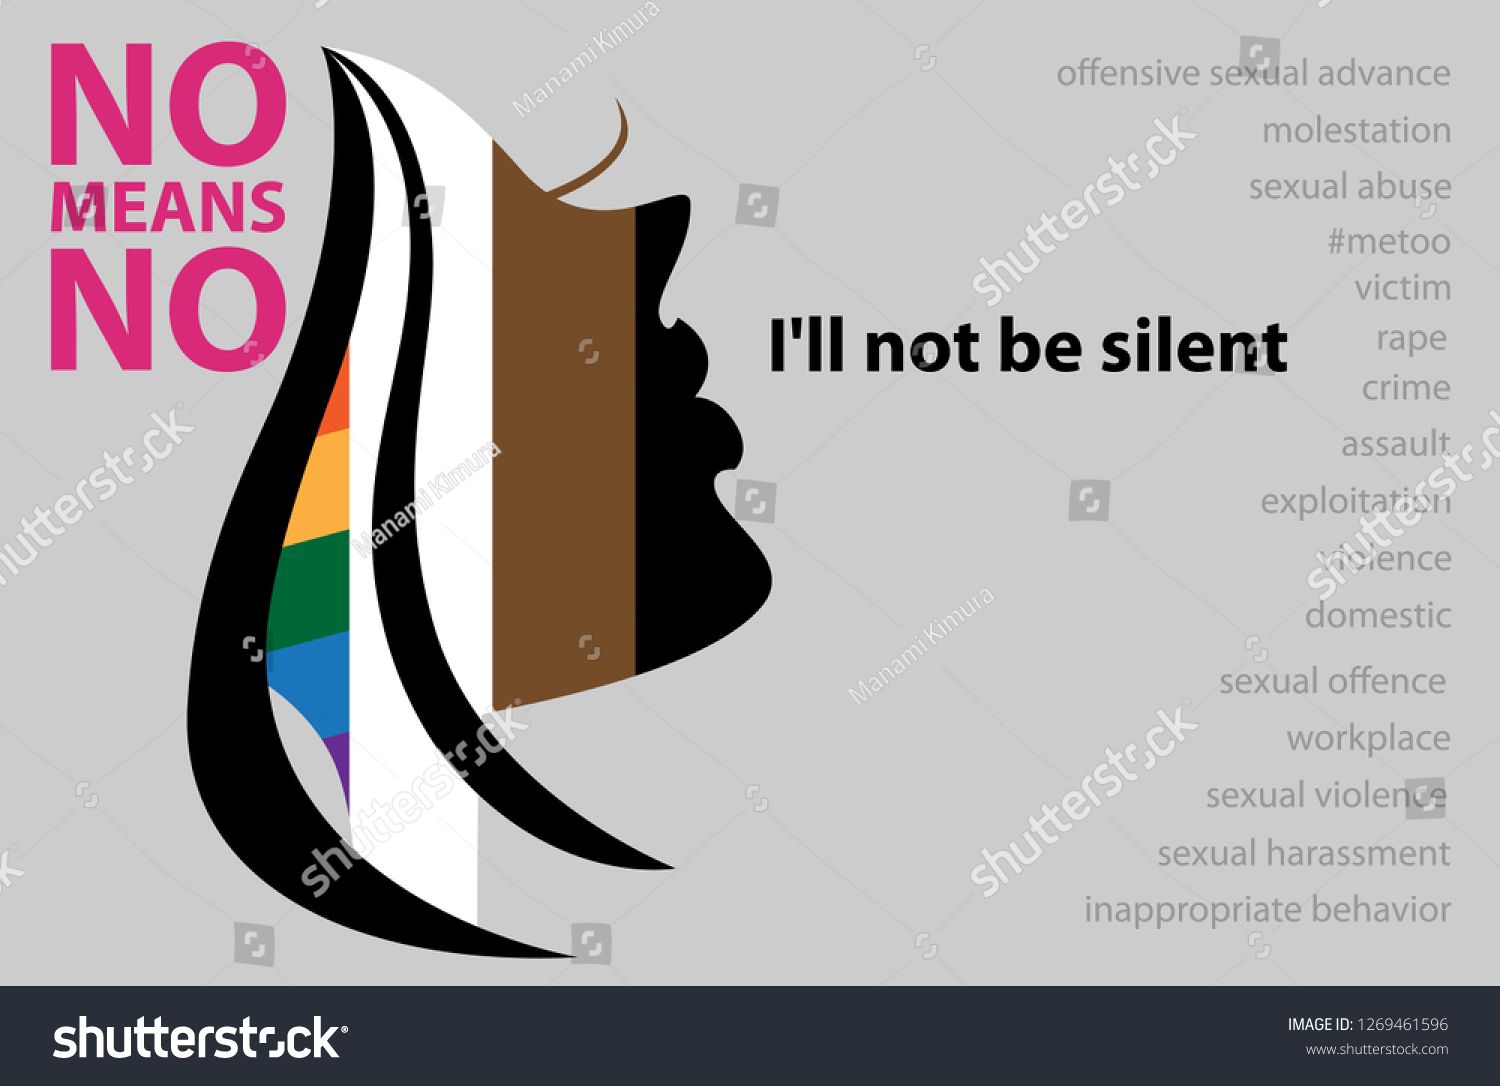 No Means No Sexual Harassment Prevention Stock Vector Royalty Free 1269461596 Shutterstock 